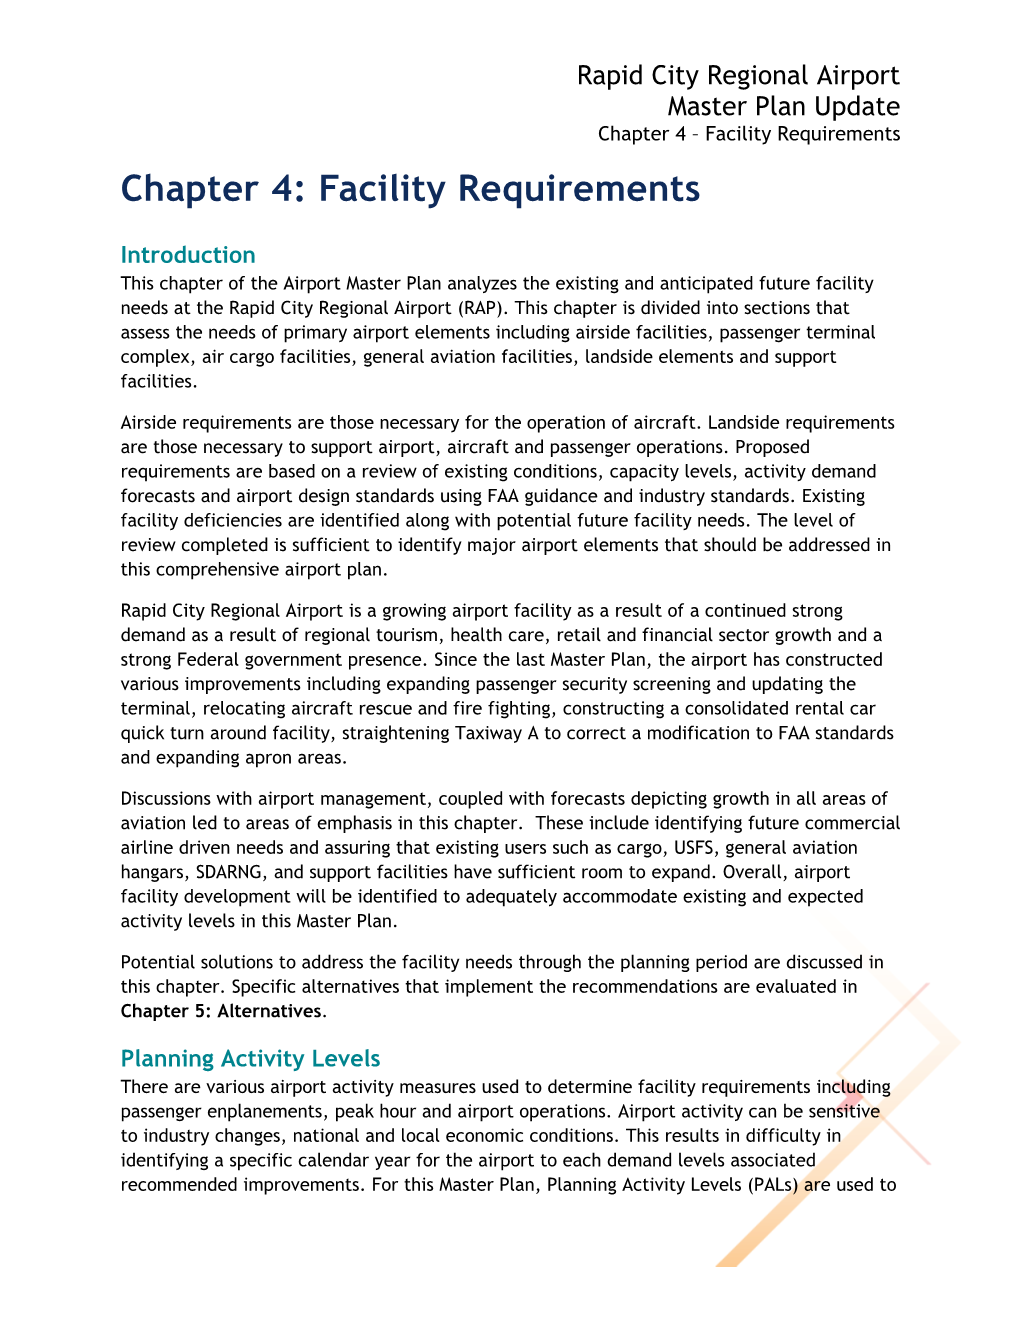 Chapter 4: Facility Requirements